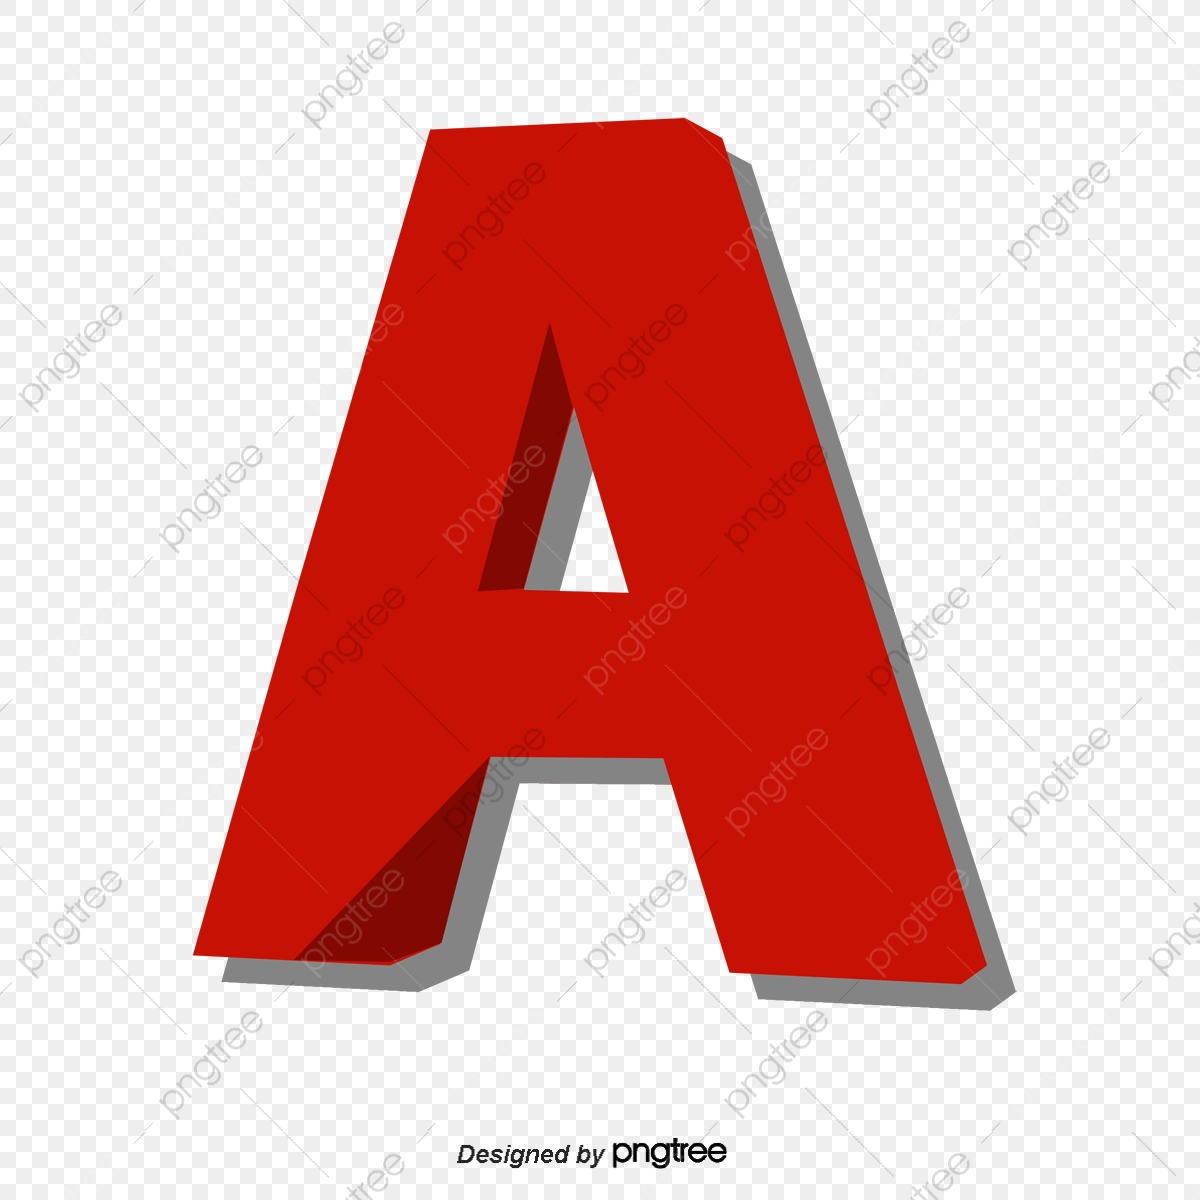 Origami Letter E Red Origami Letter E Letter Vector Gules Origami Letters Png And